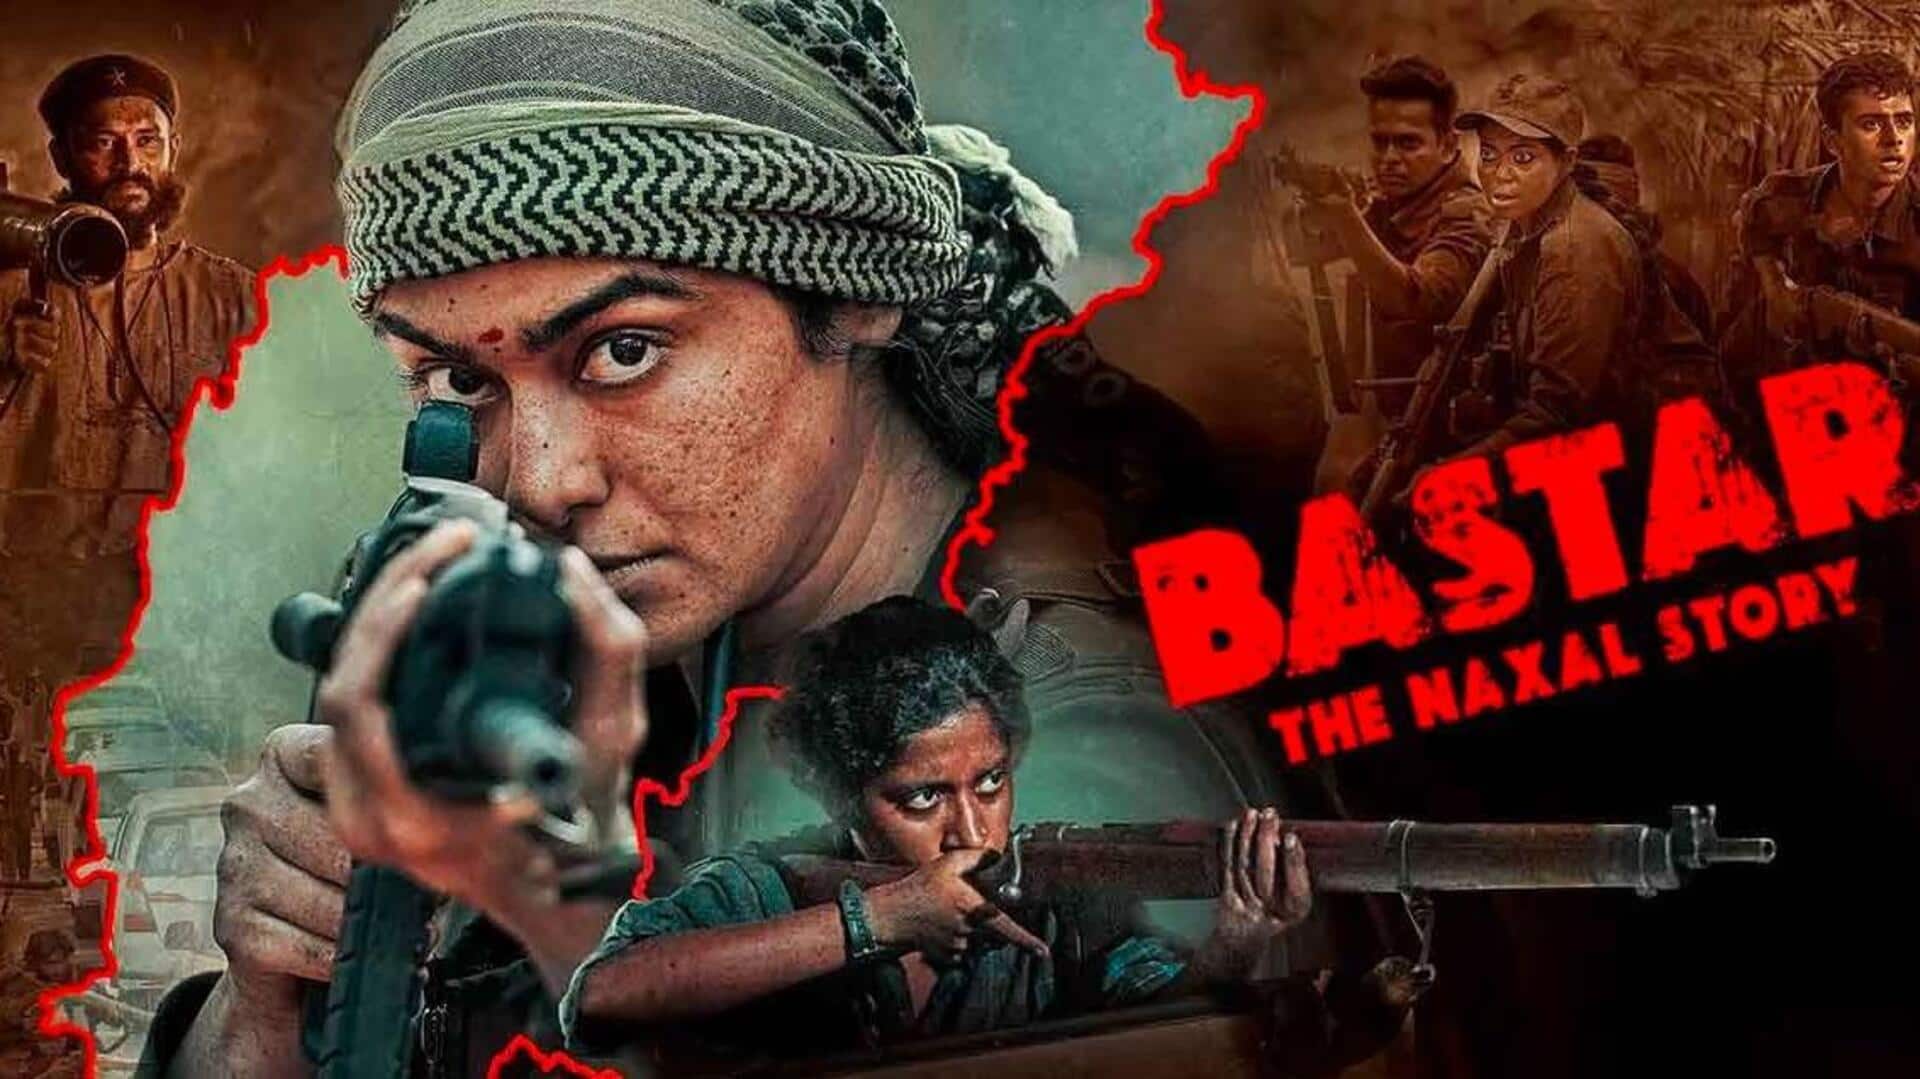 'Bastar: The Naxal Story' opens to disappointing box office numbers